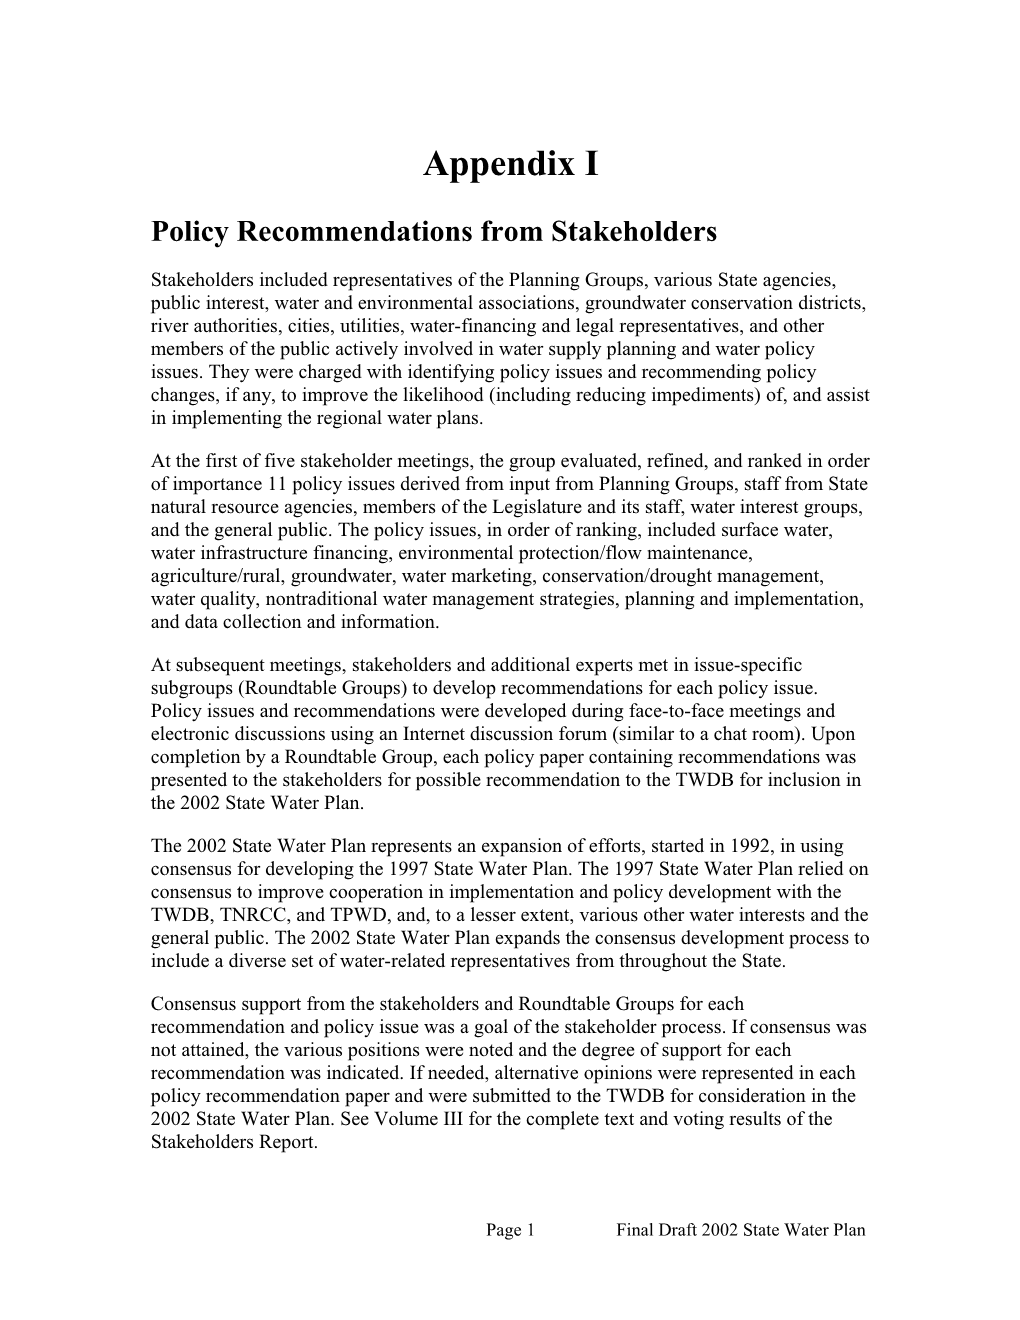 Policy Recommendations from Stakeholders